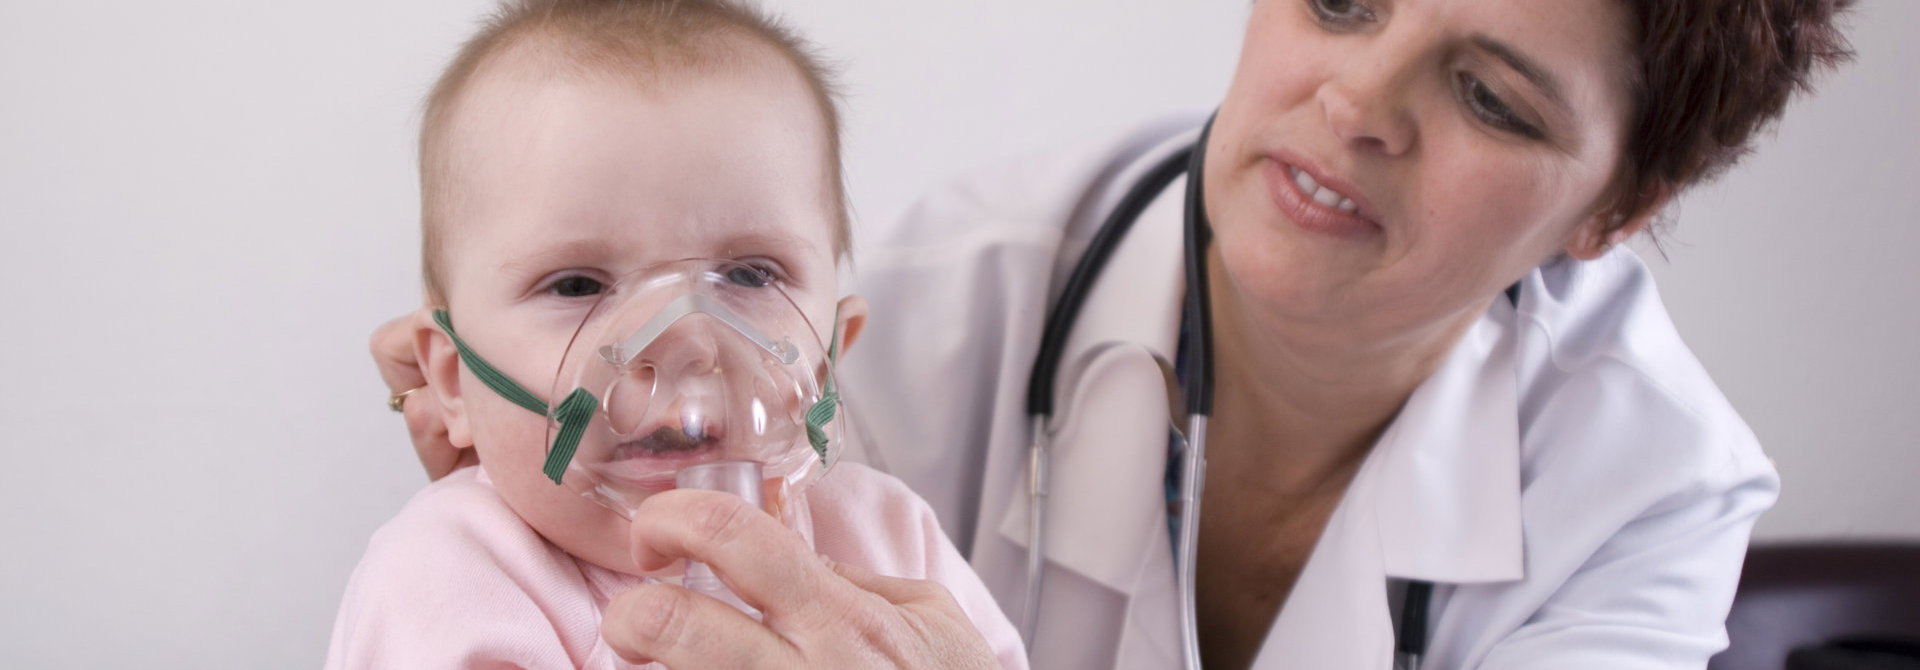 doctor giving baby a nebulizer